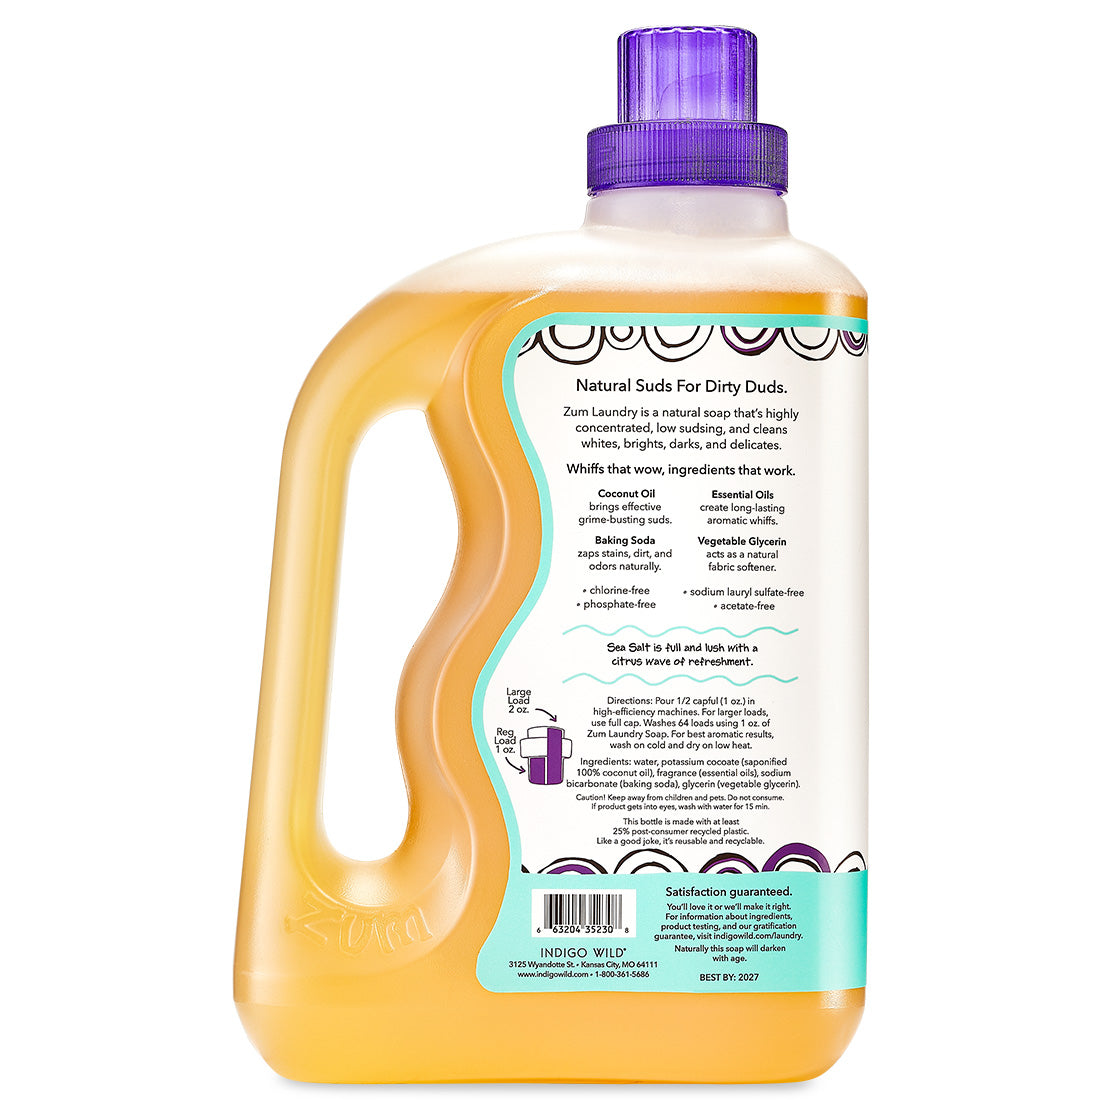 EWG's Guide to Healthy Cleaning  SPRAY 'N WASH Cleaner Ratings